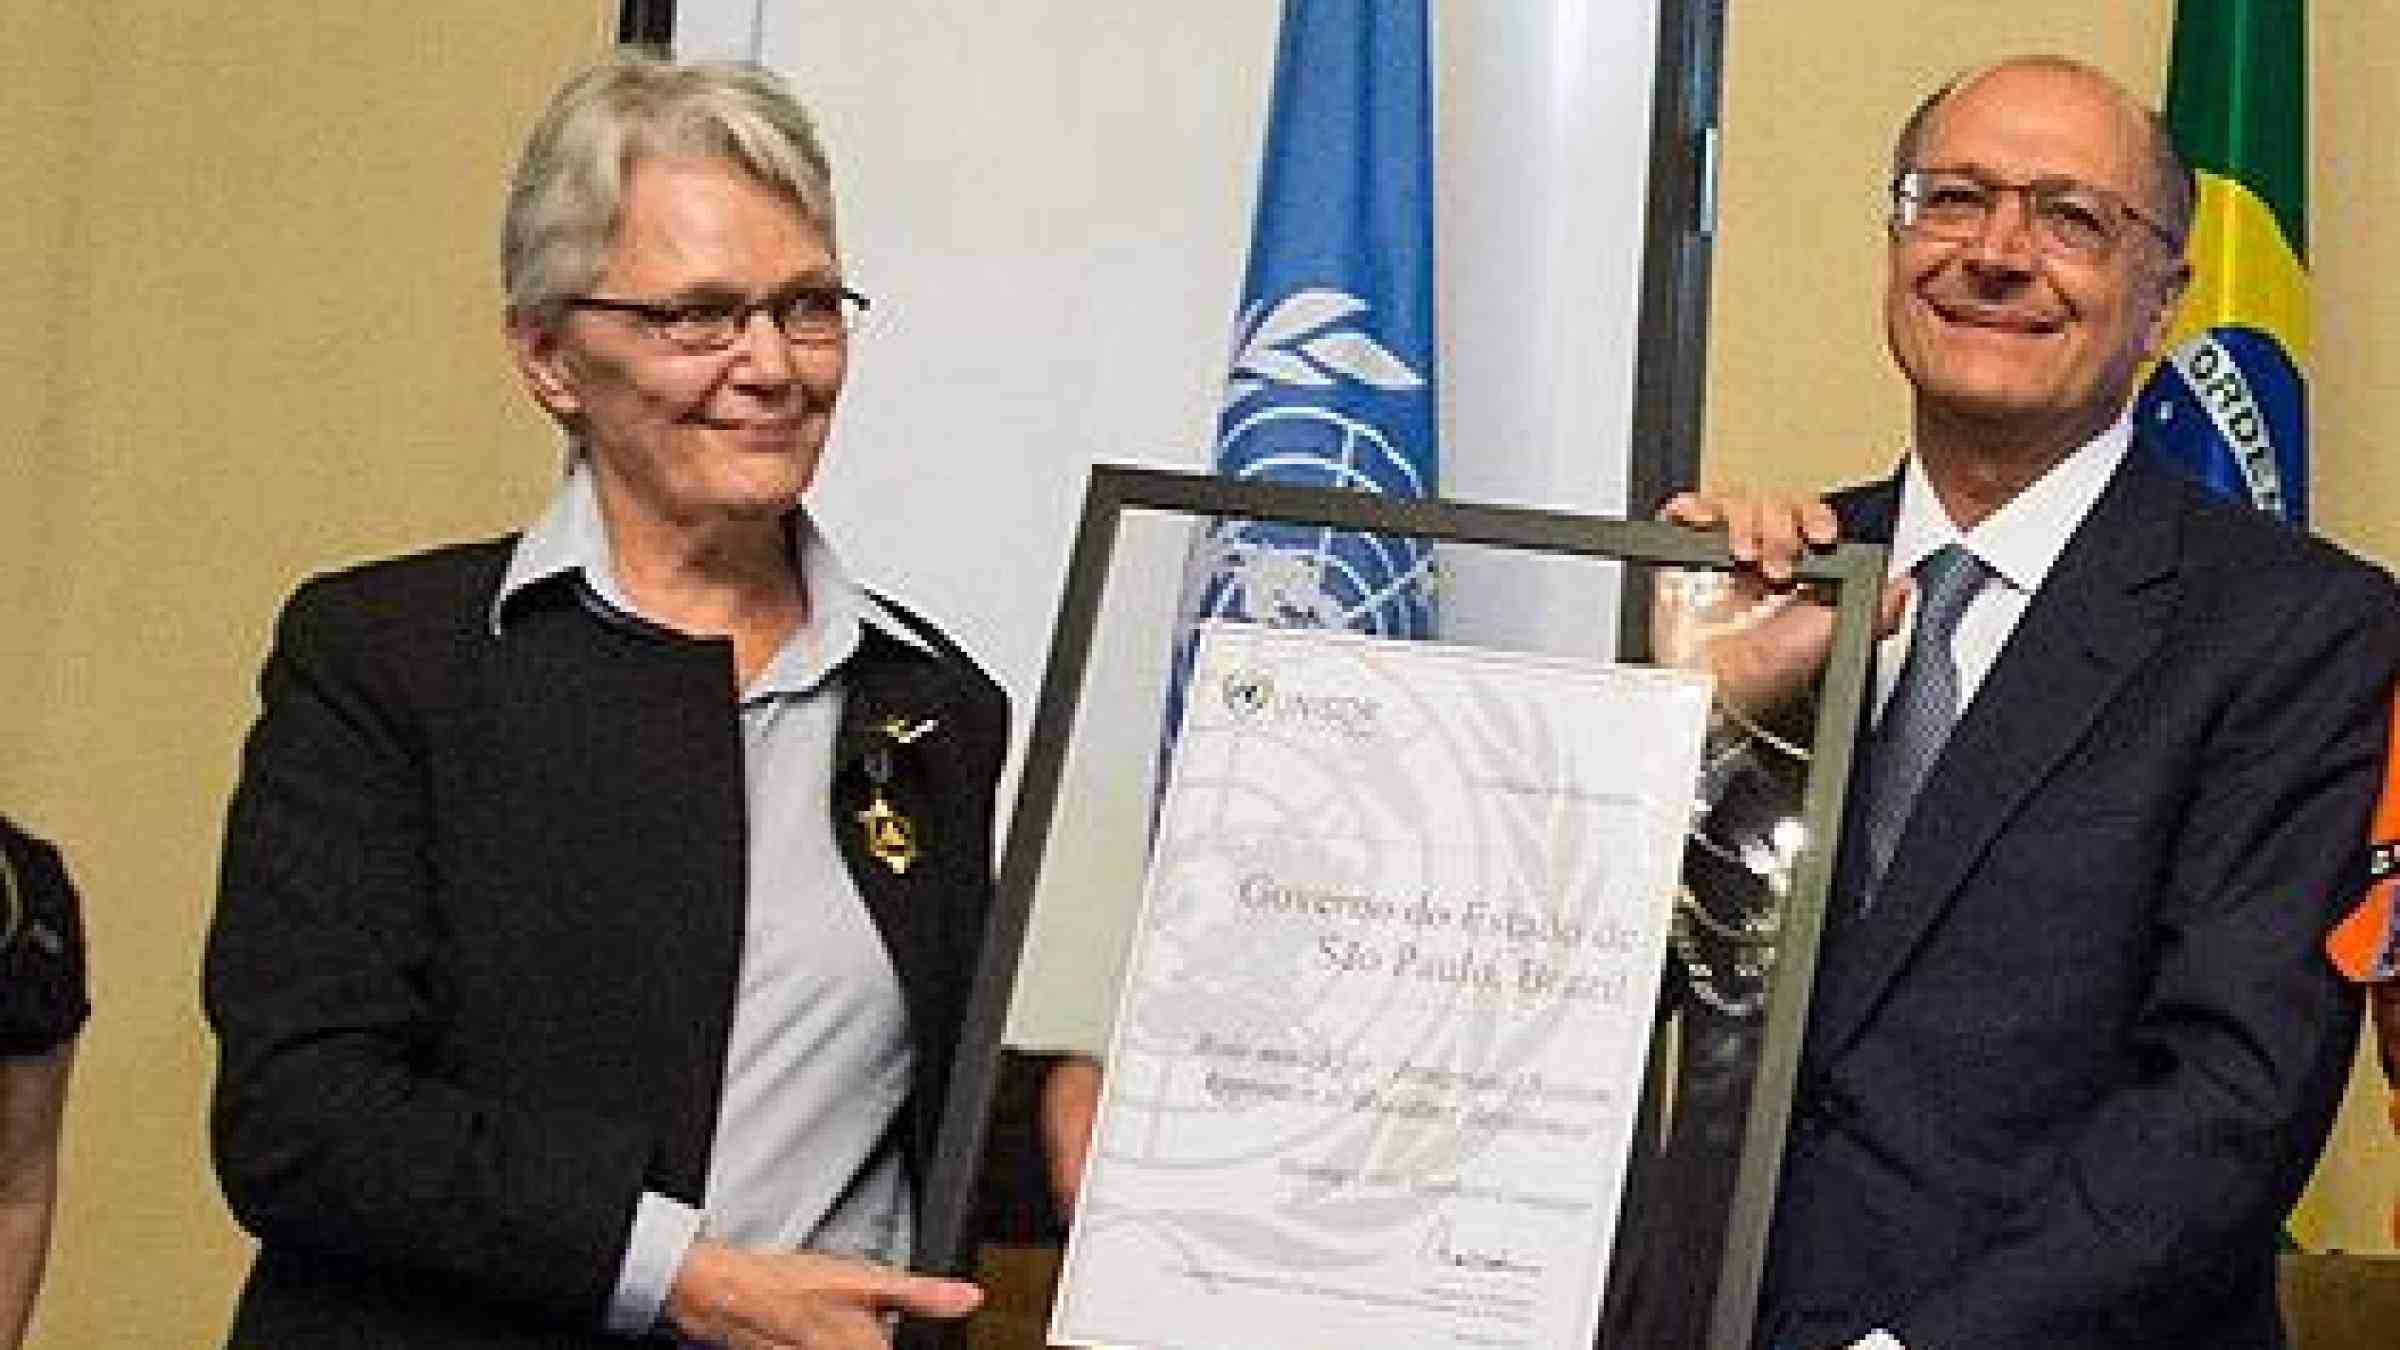 UNISDR Chief Margareta Wahlstrom and Sao Paulo State Governor Geraldo Alckmin at today's ceremony where the Sao Paulo was recognized as a role model in UNISDR's Making Cities Resilient Campaign. (Photo: Diogo Moreira)